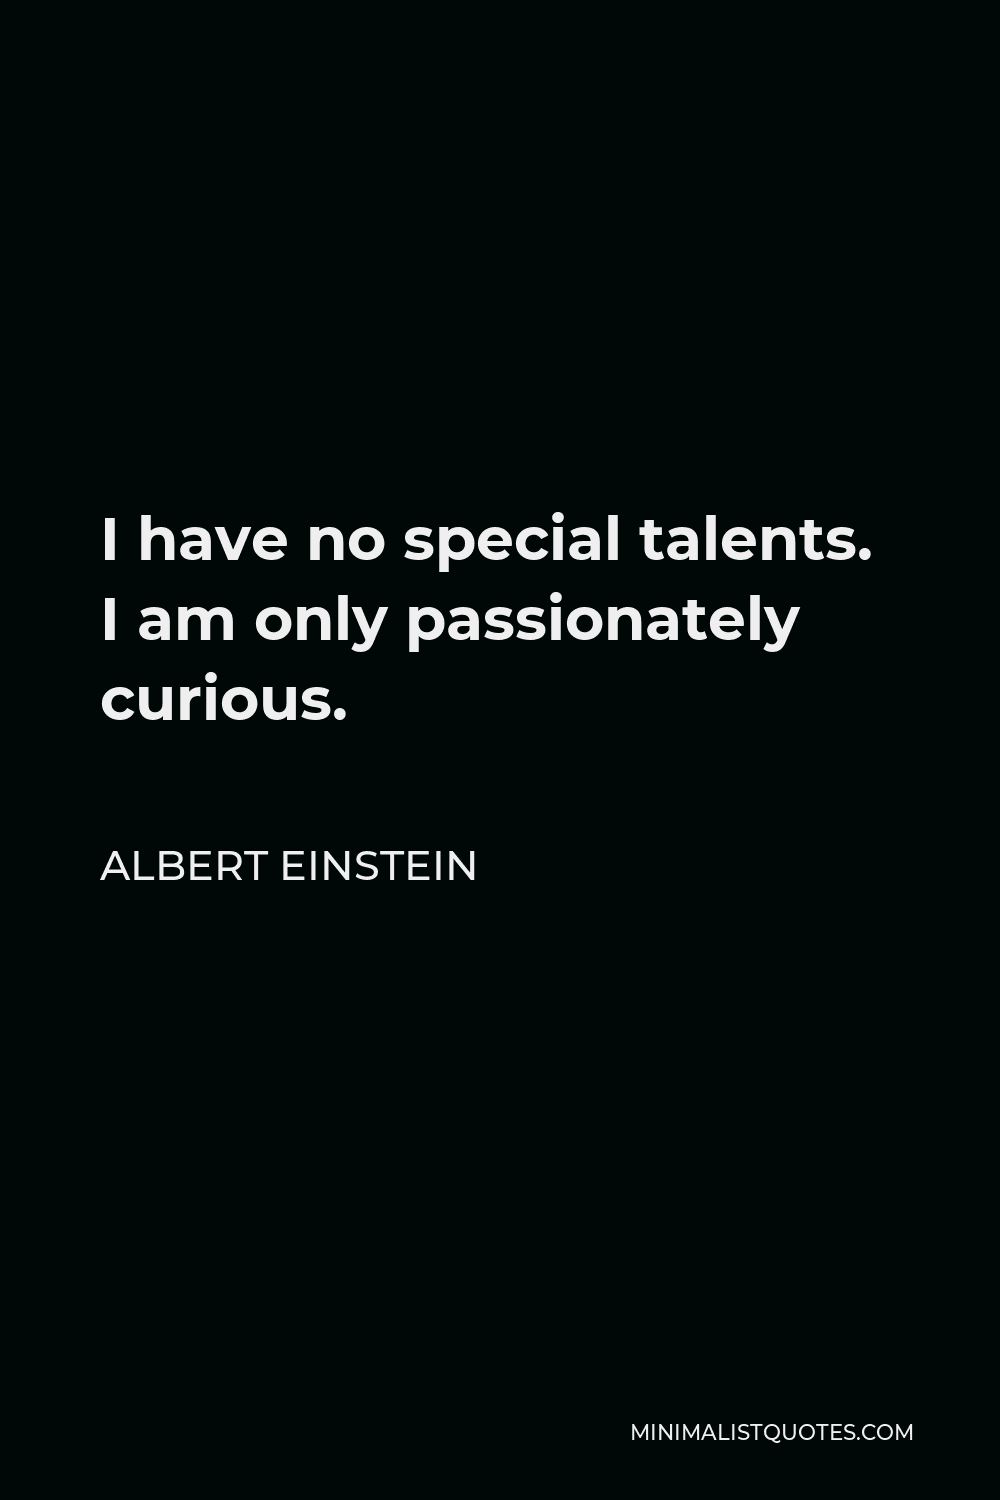 Albert Einstein Quote - I have no special talents. I am only passionately curious.